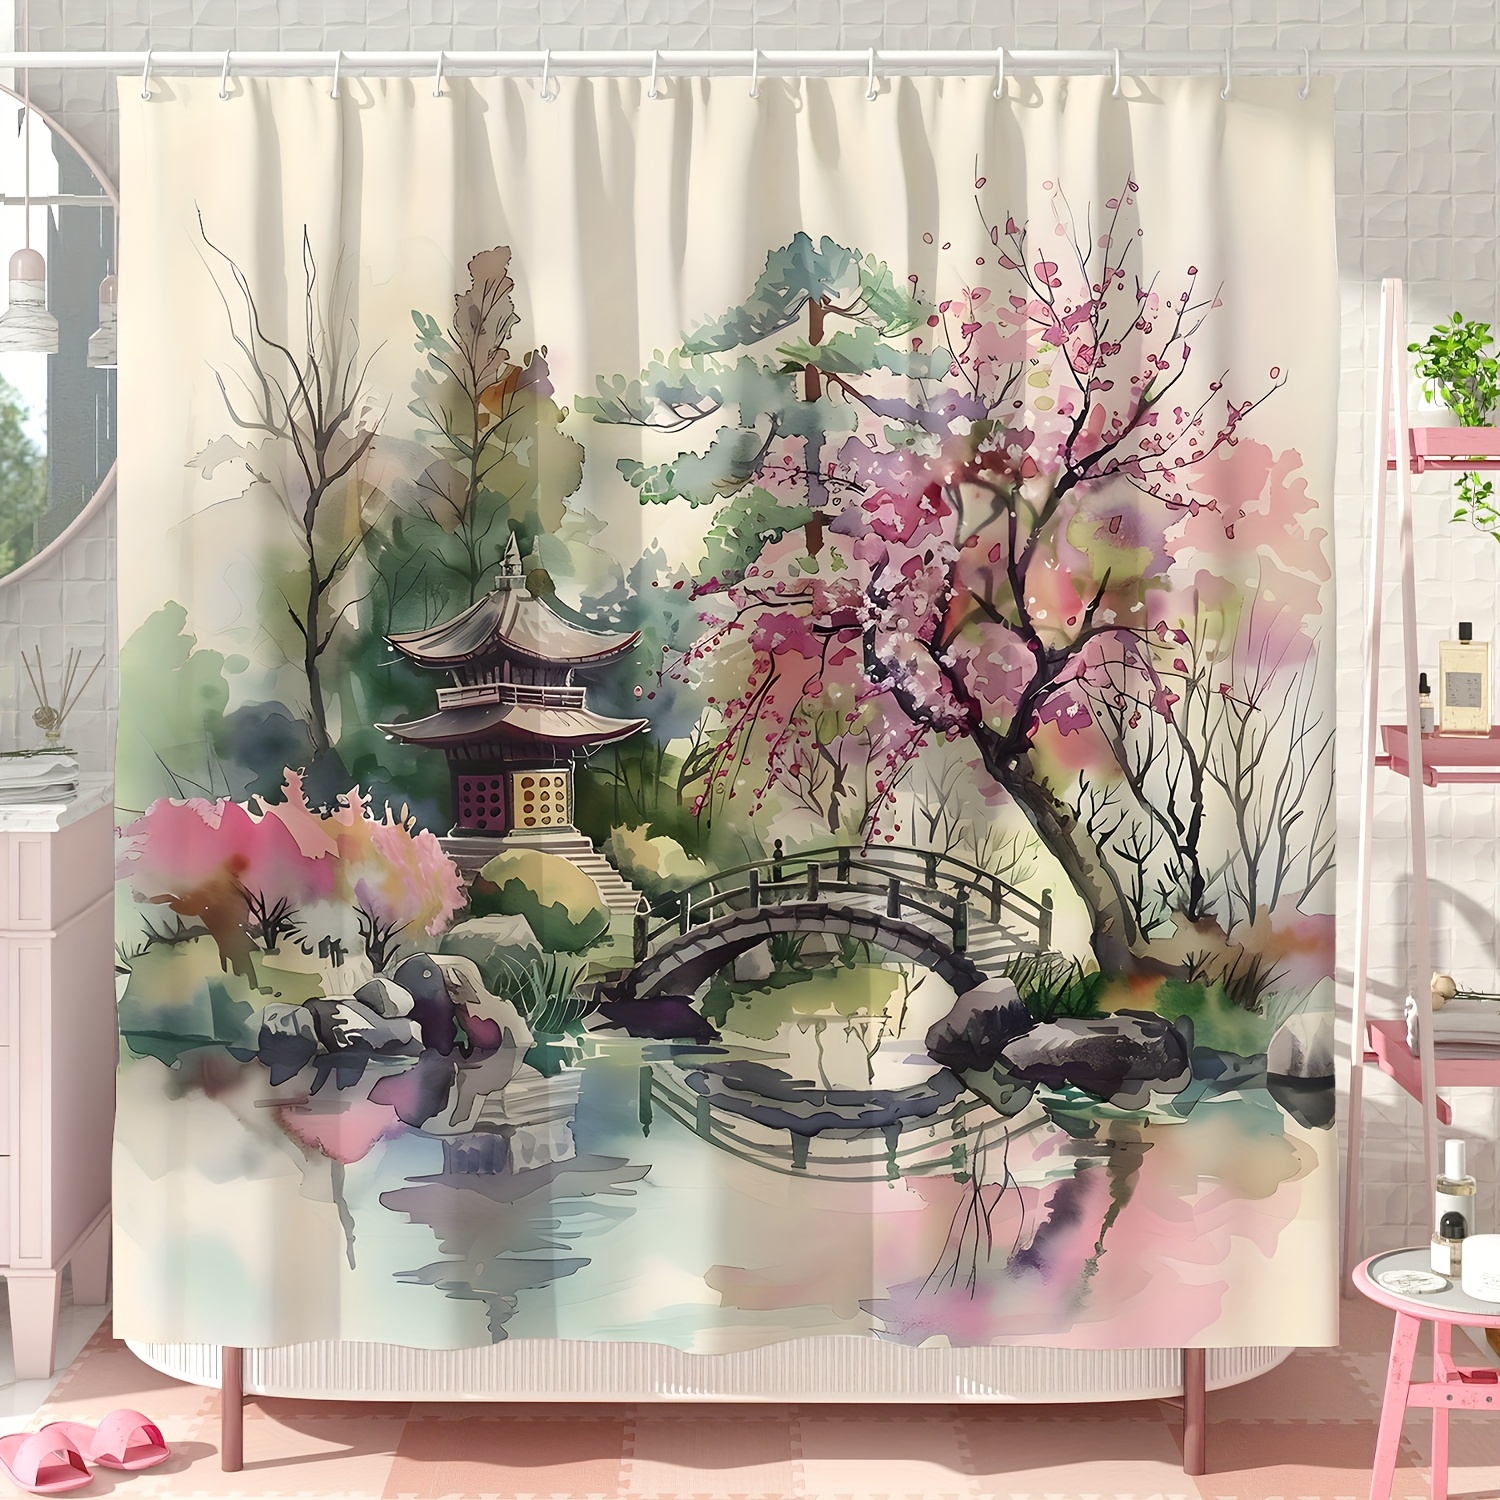 

Sakura Shower Curtain - Waterproof Polyester, 71x71 Inch With 12 Hooks, Machine Washable, Perfect For Bathroom Decor